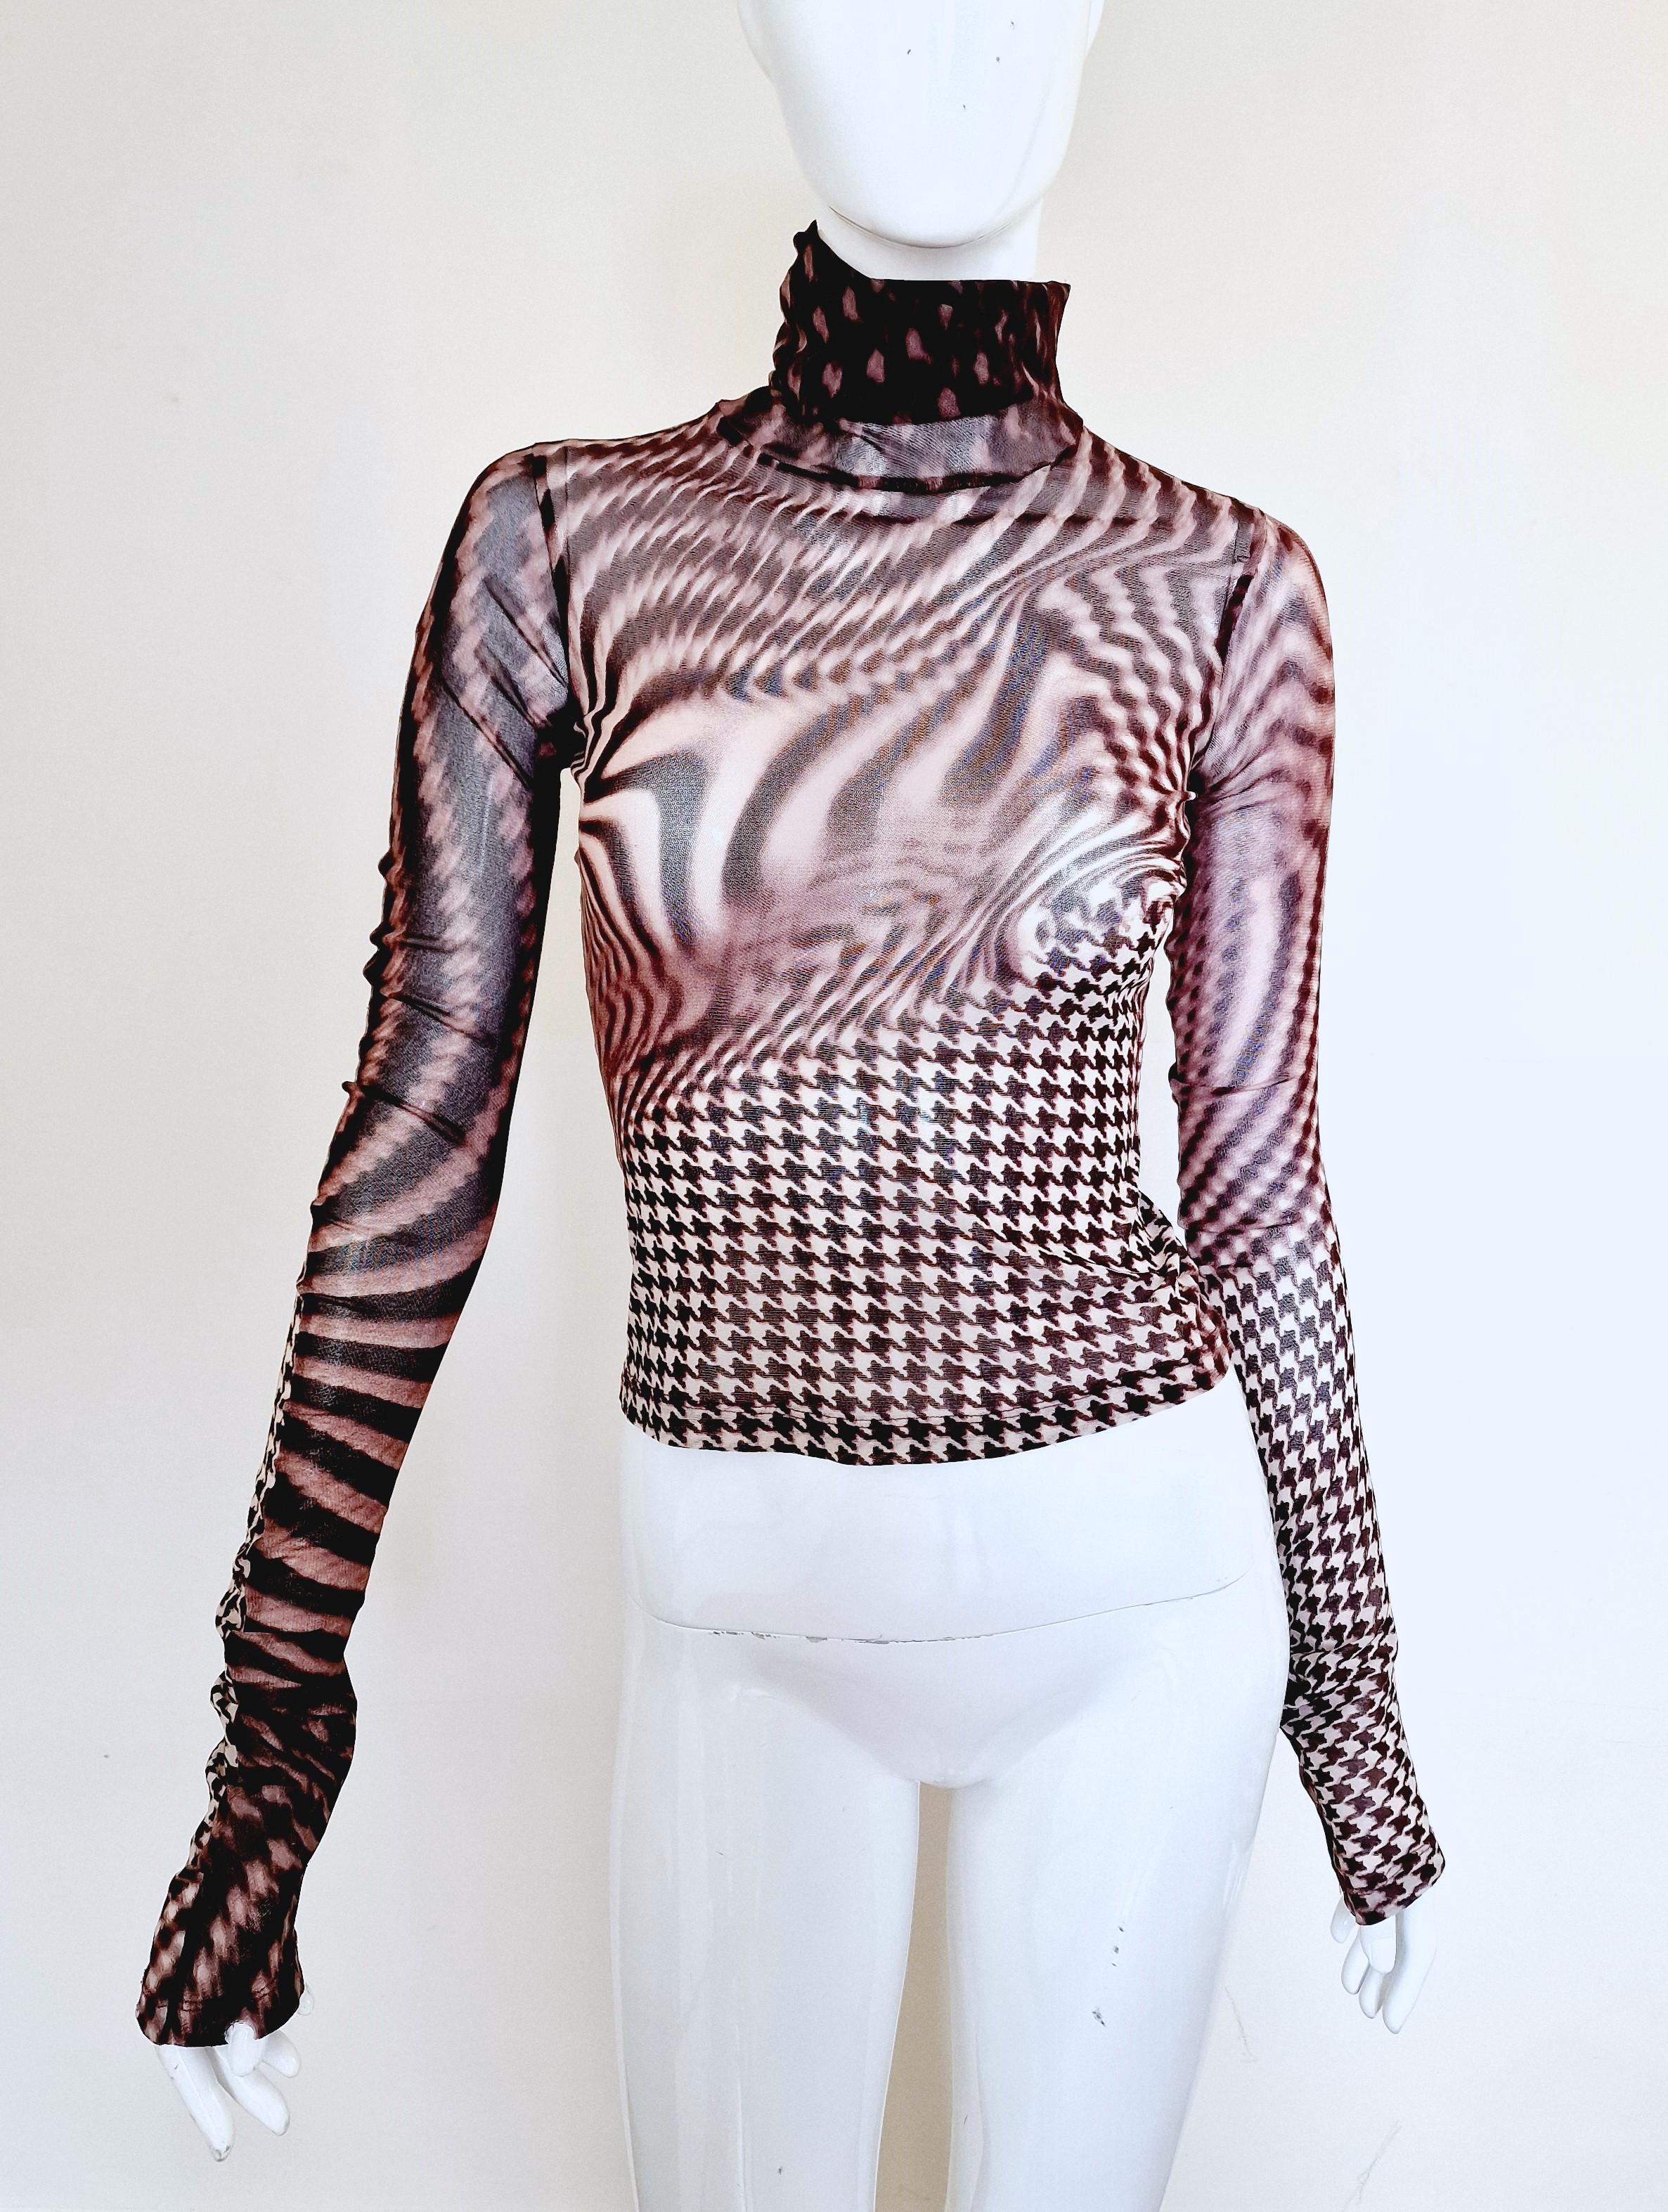 Psychedelic mesh top by Cavalli!
Transparent. 
Extra long sleeves!
Turtleneck.
EXCELLENT condition!

SIZE
It fits from XS to medium.
Marked size: IT44.
Length: 49 cm / 19.3 inch
Bust: 35 cm / 13.8 inh
Waist: 30 cm / 11.8 ich
Shoulder to shoulder: 31